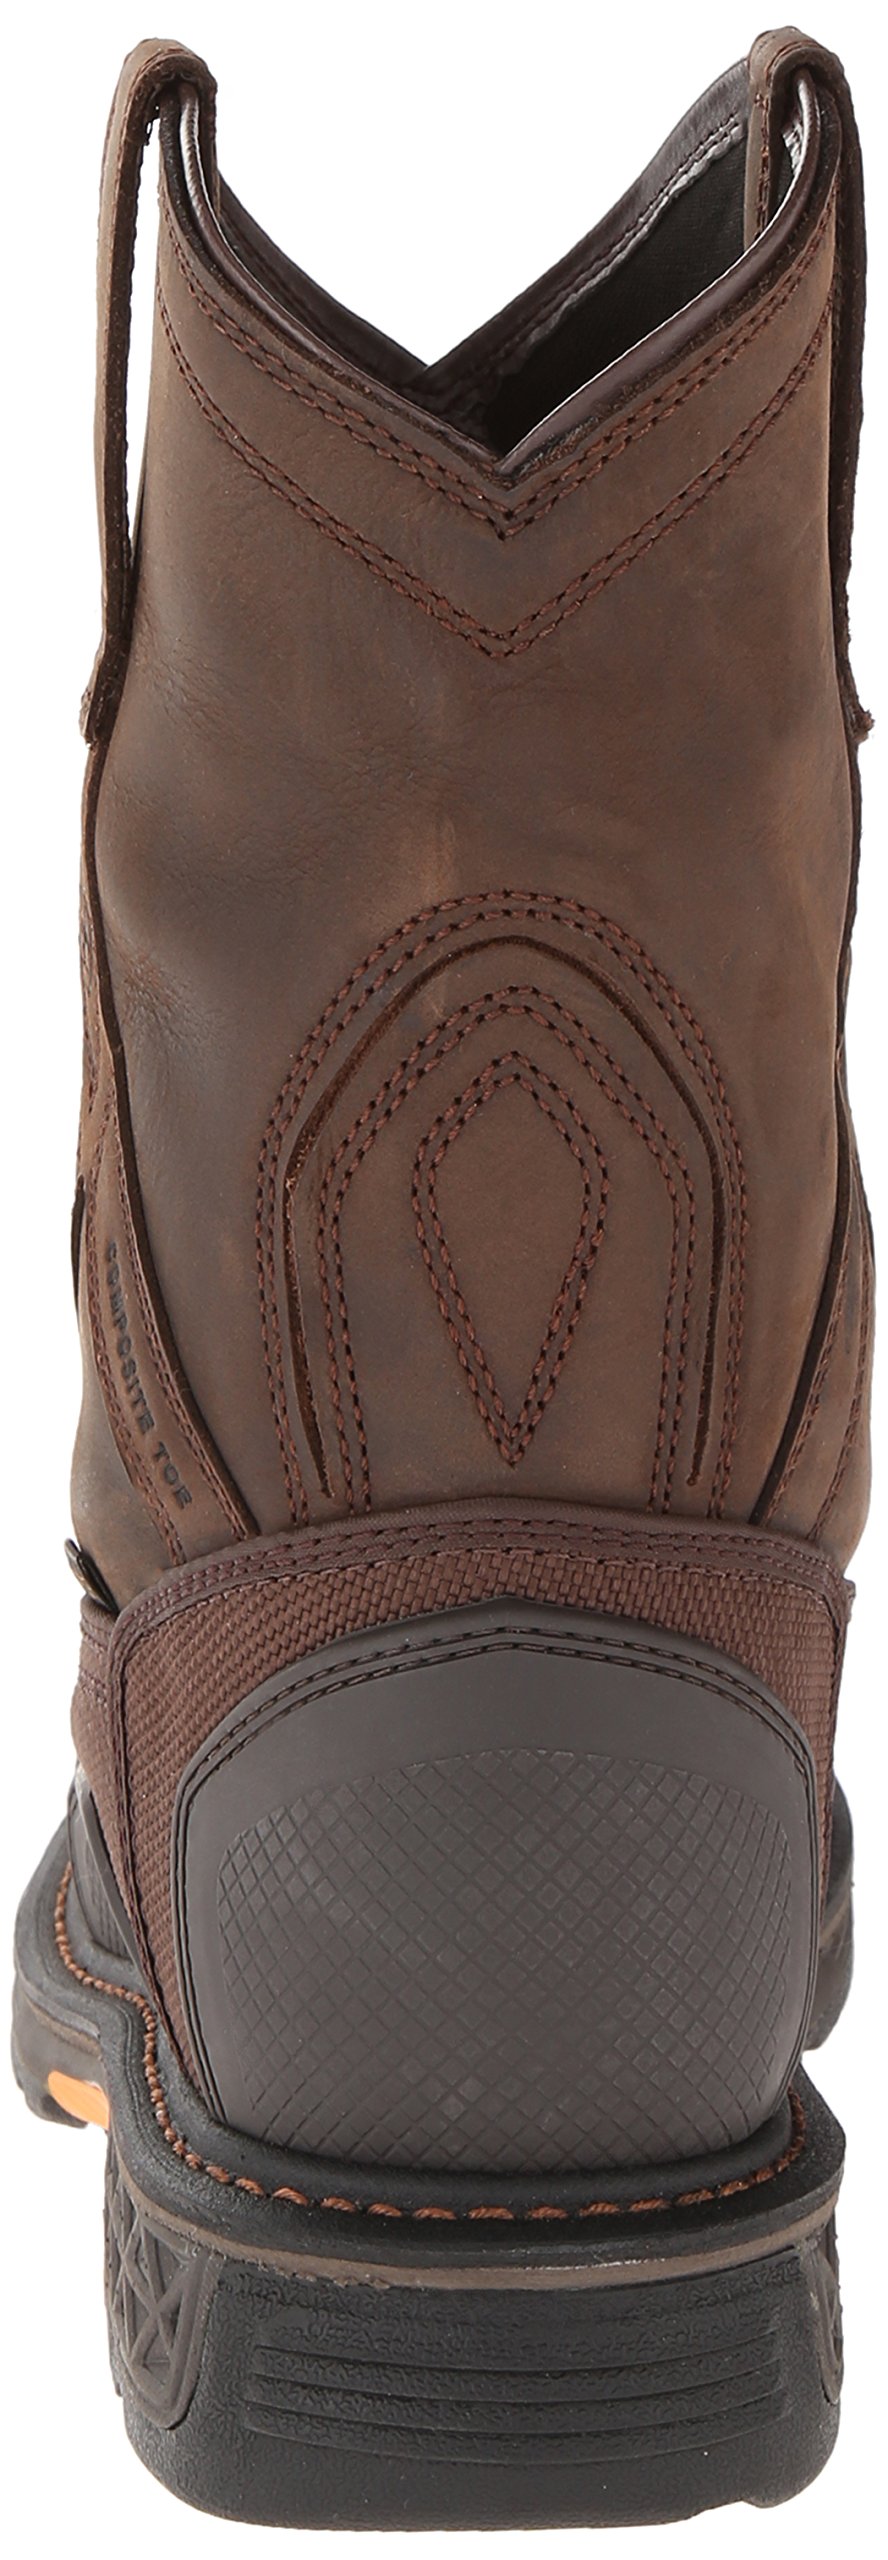 Ariat Men's Overdrive XTR Pull-on H2O Composite Toe Work Boot